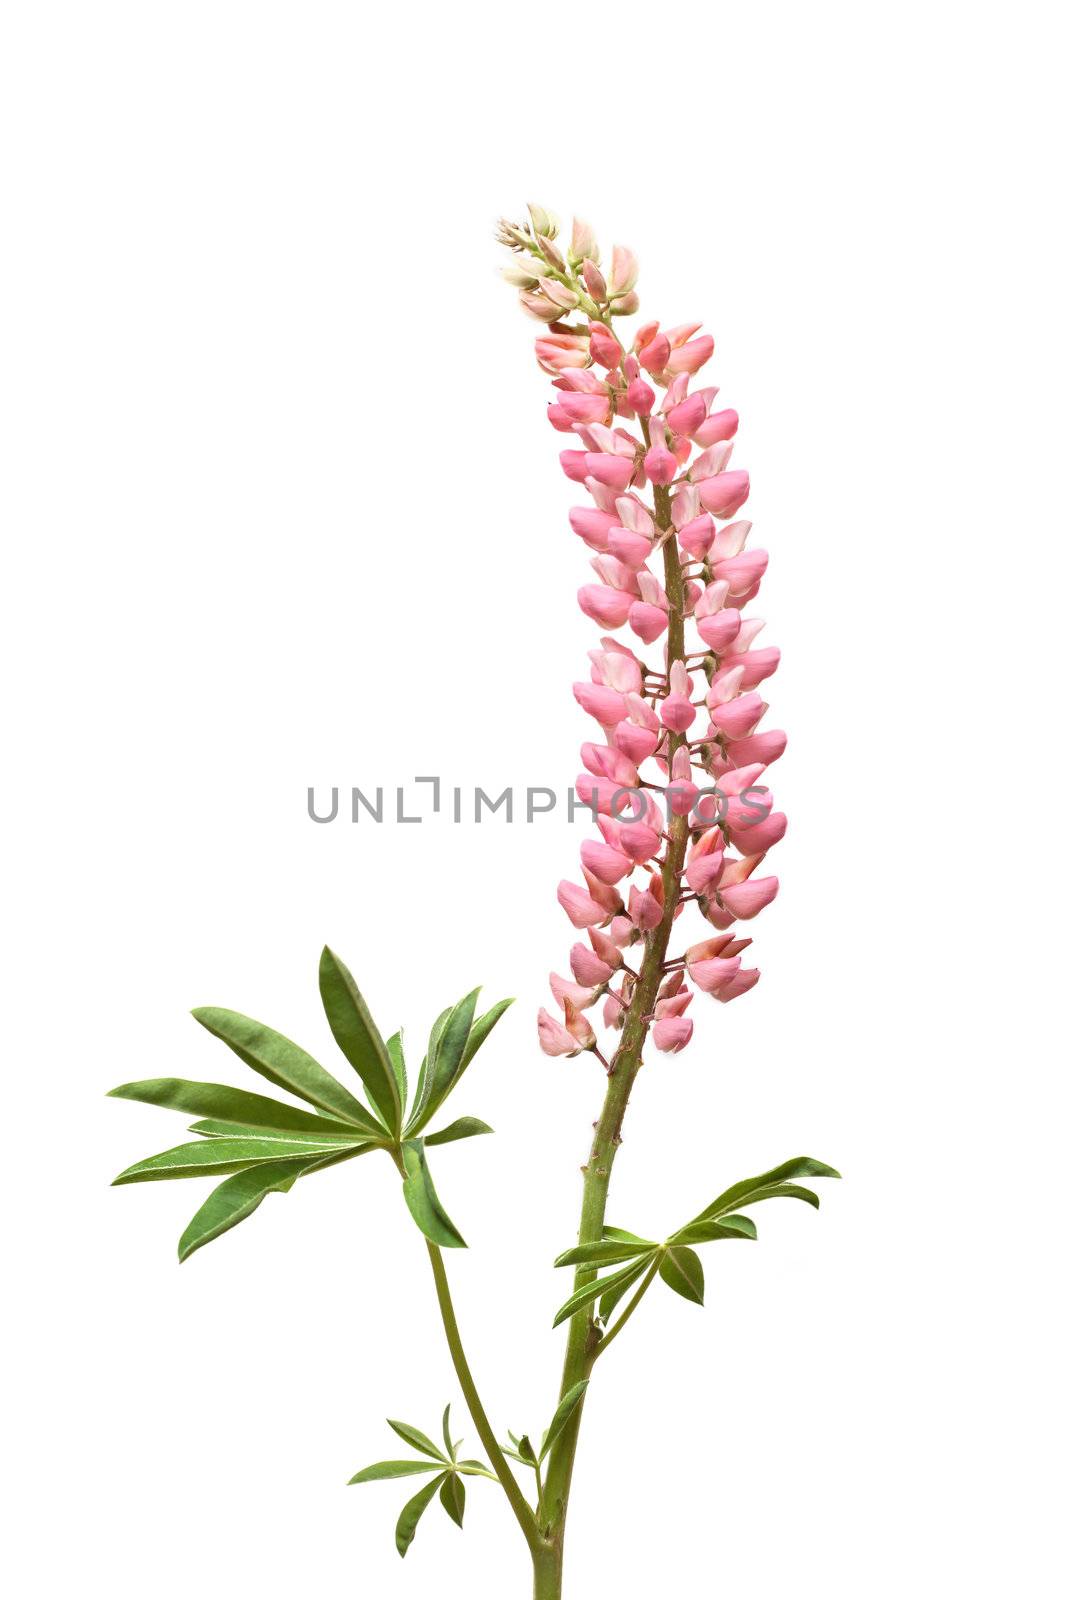 Closeup of pink lupine with long stem on white background